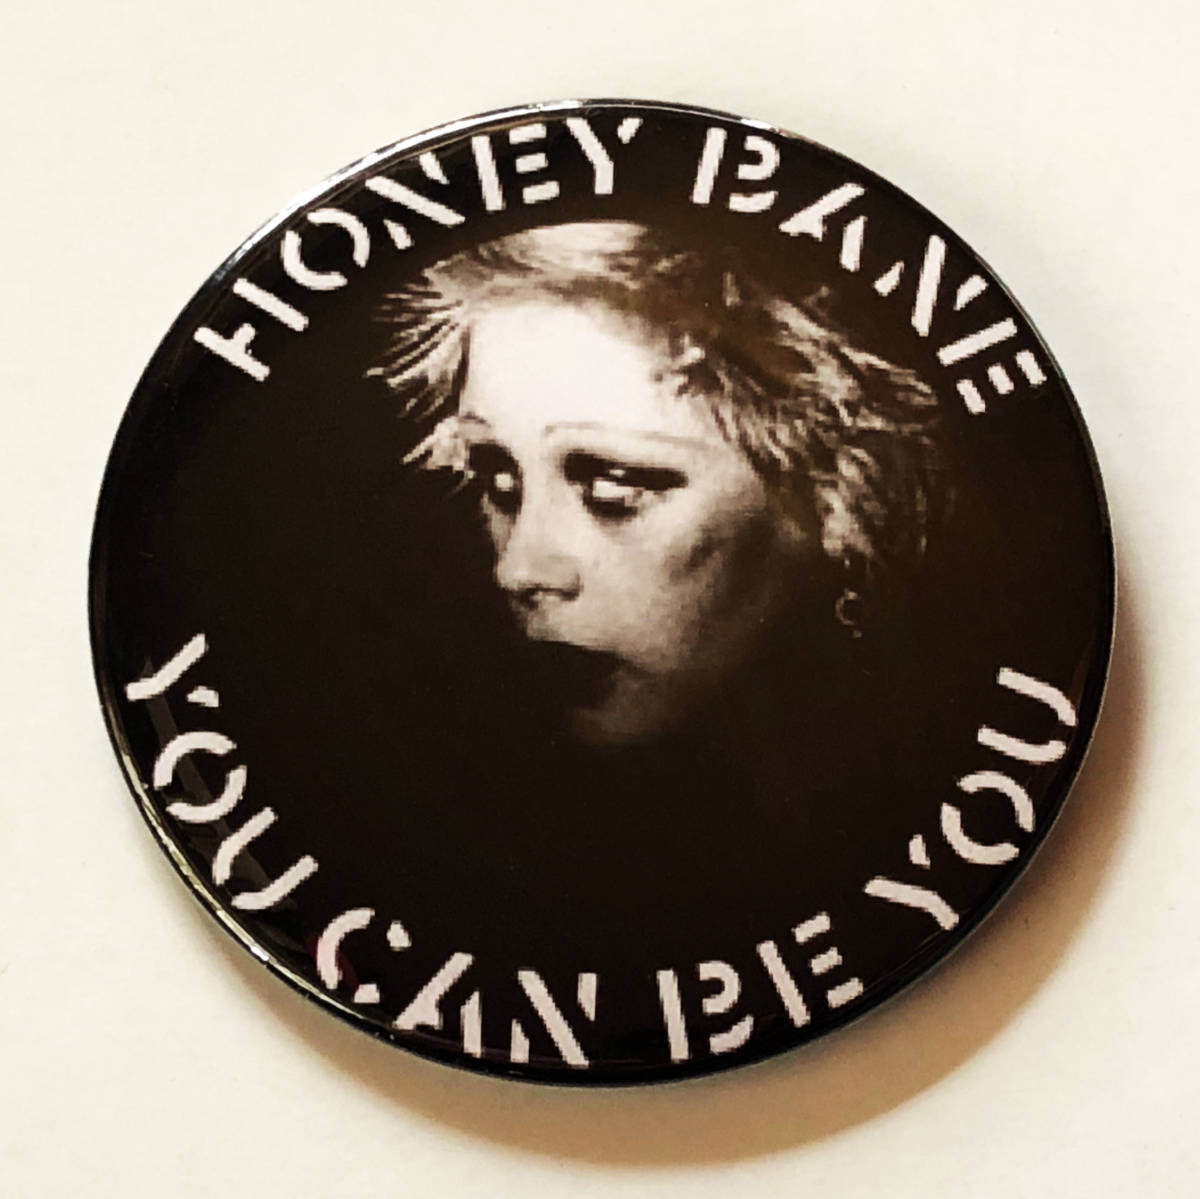 HONEY BANE - You Can Be You 缶バッジ 40mm #UK #punk #80's cult killer punk rock #custom buttons_画像1